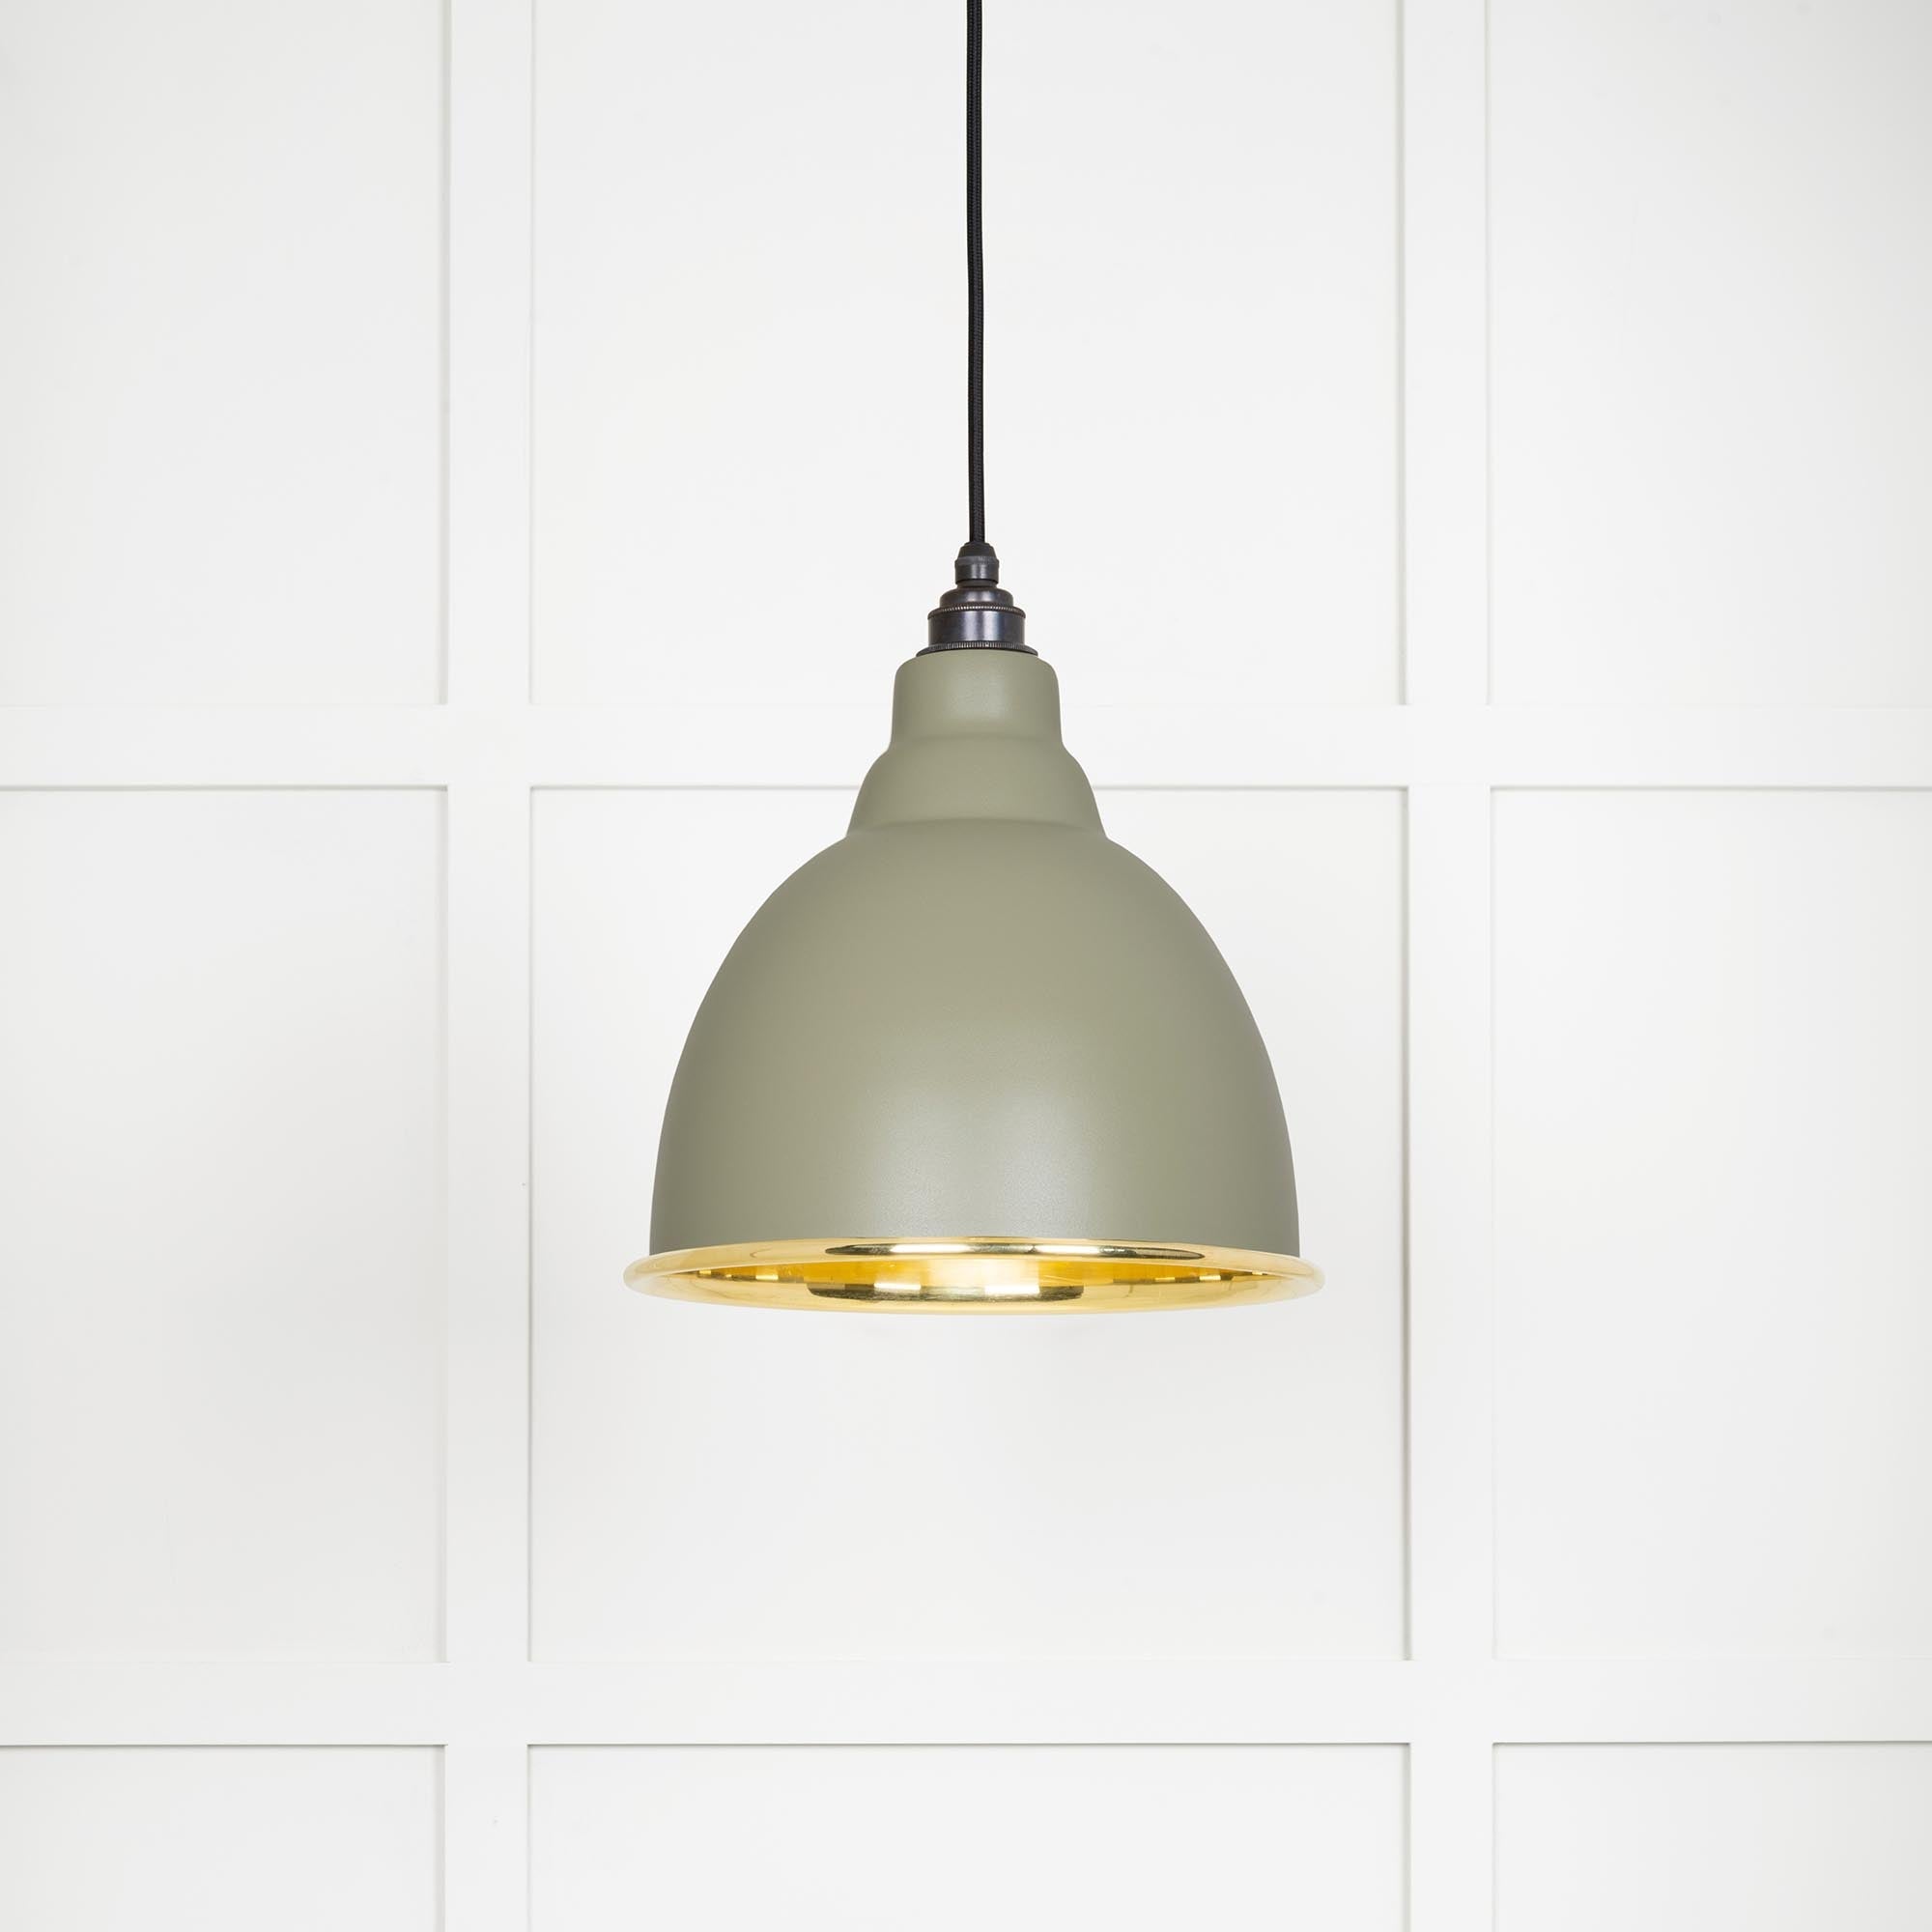 Image of Brindley Ceiling Light in Tump